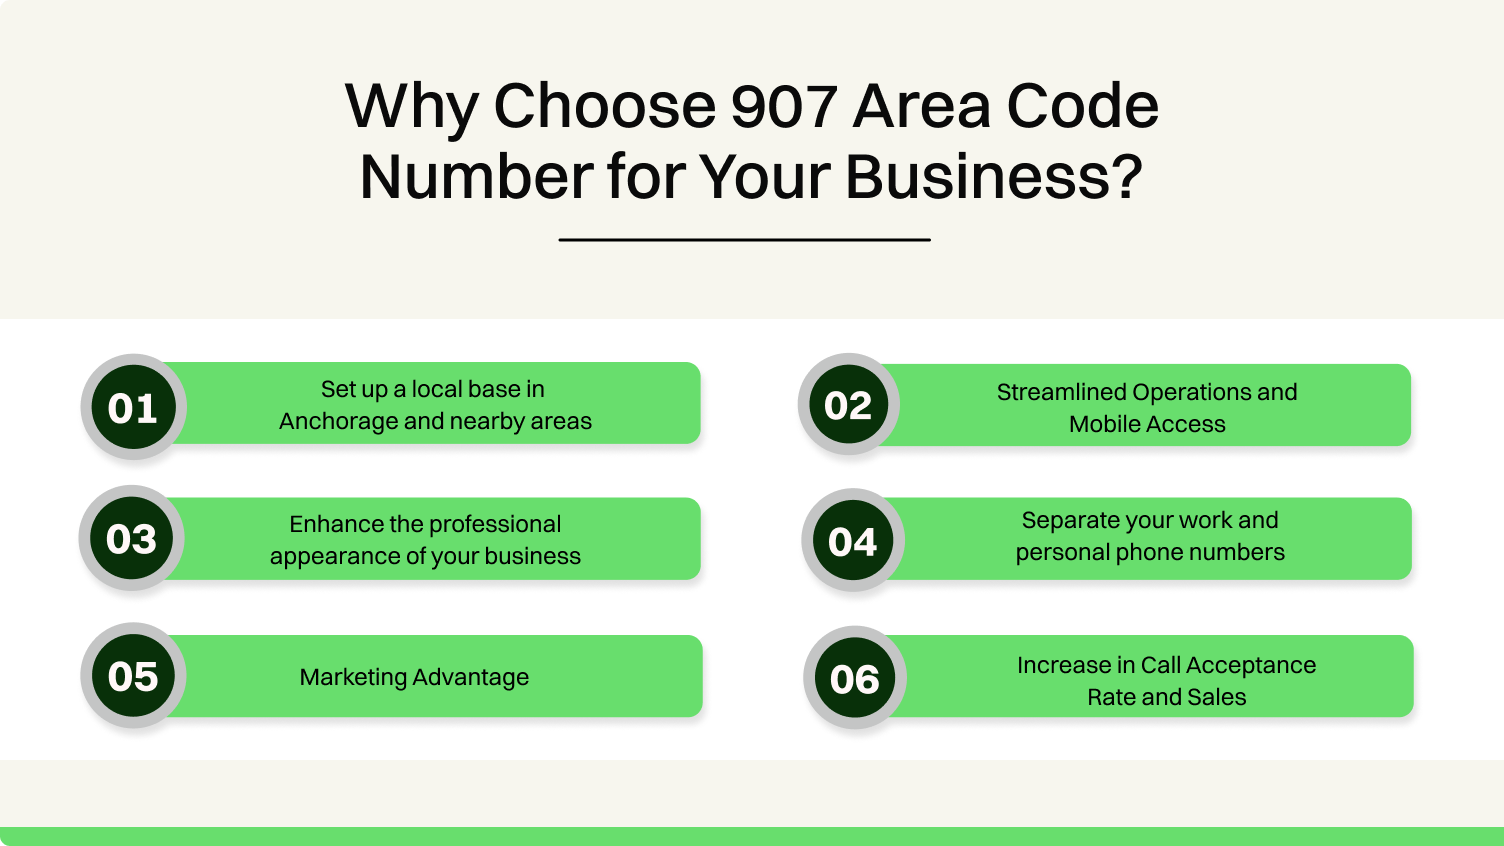 907 Area Code Number for Your Business